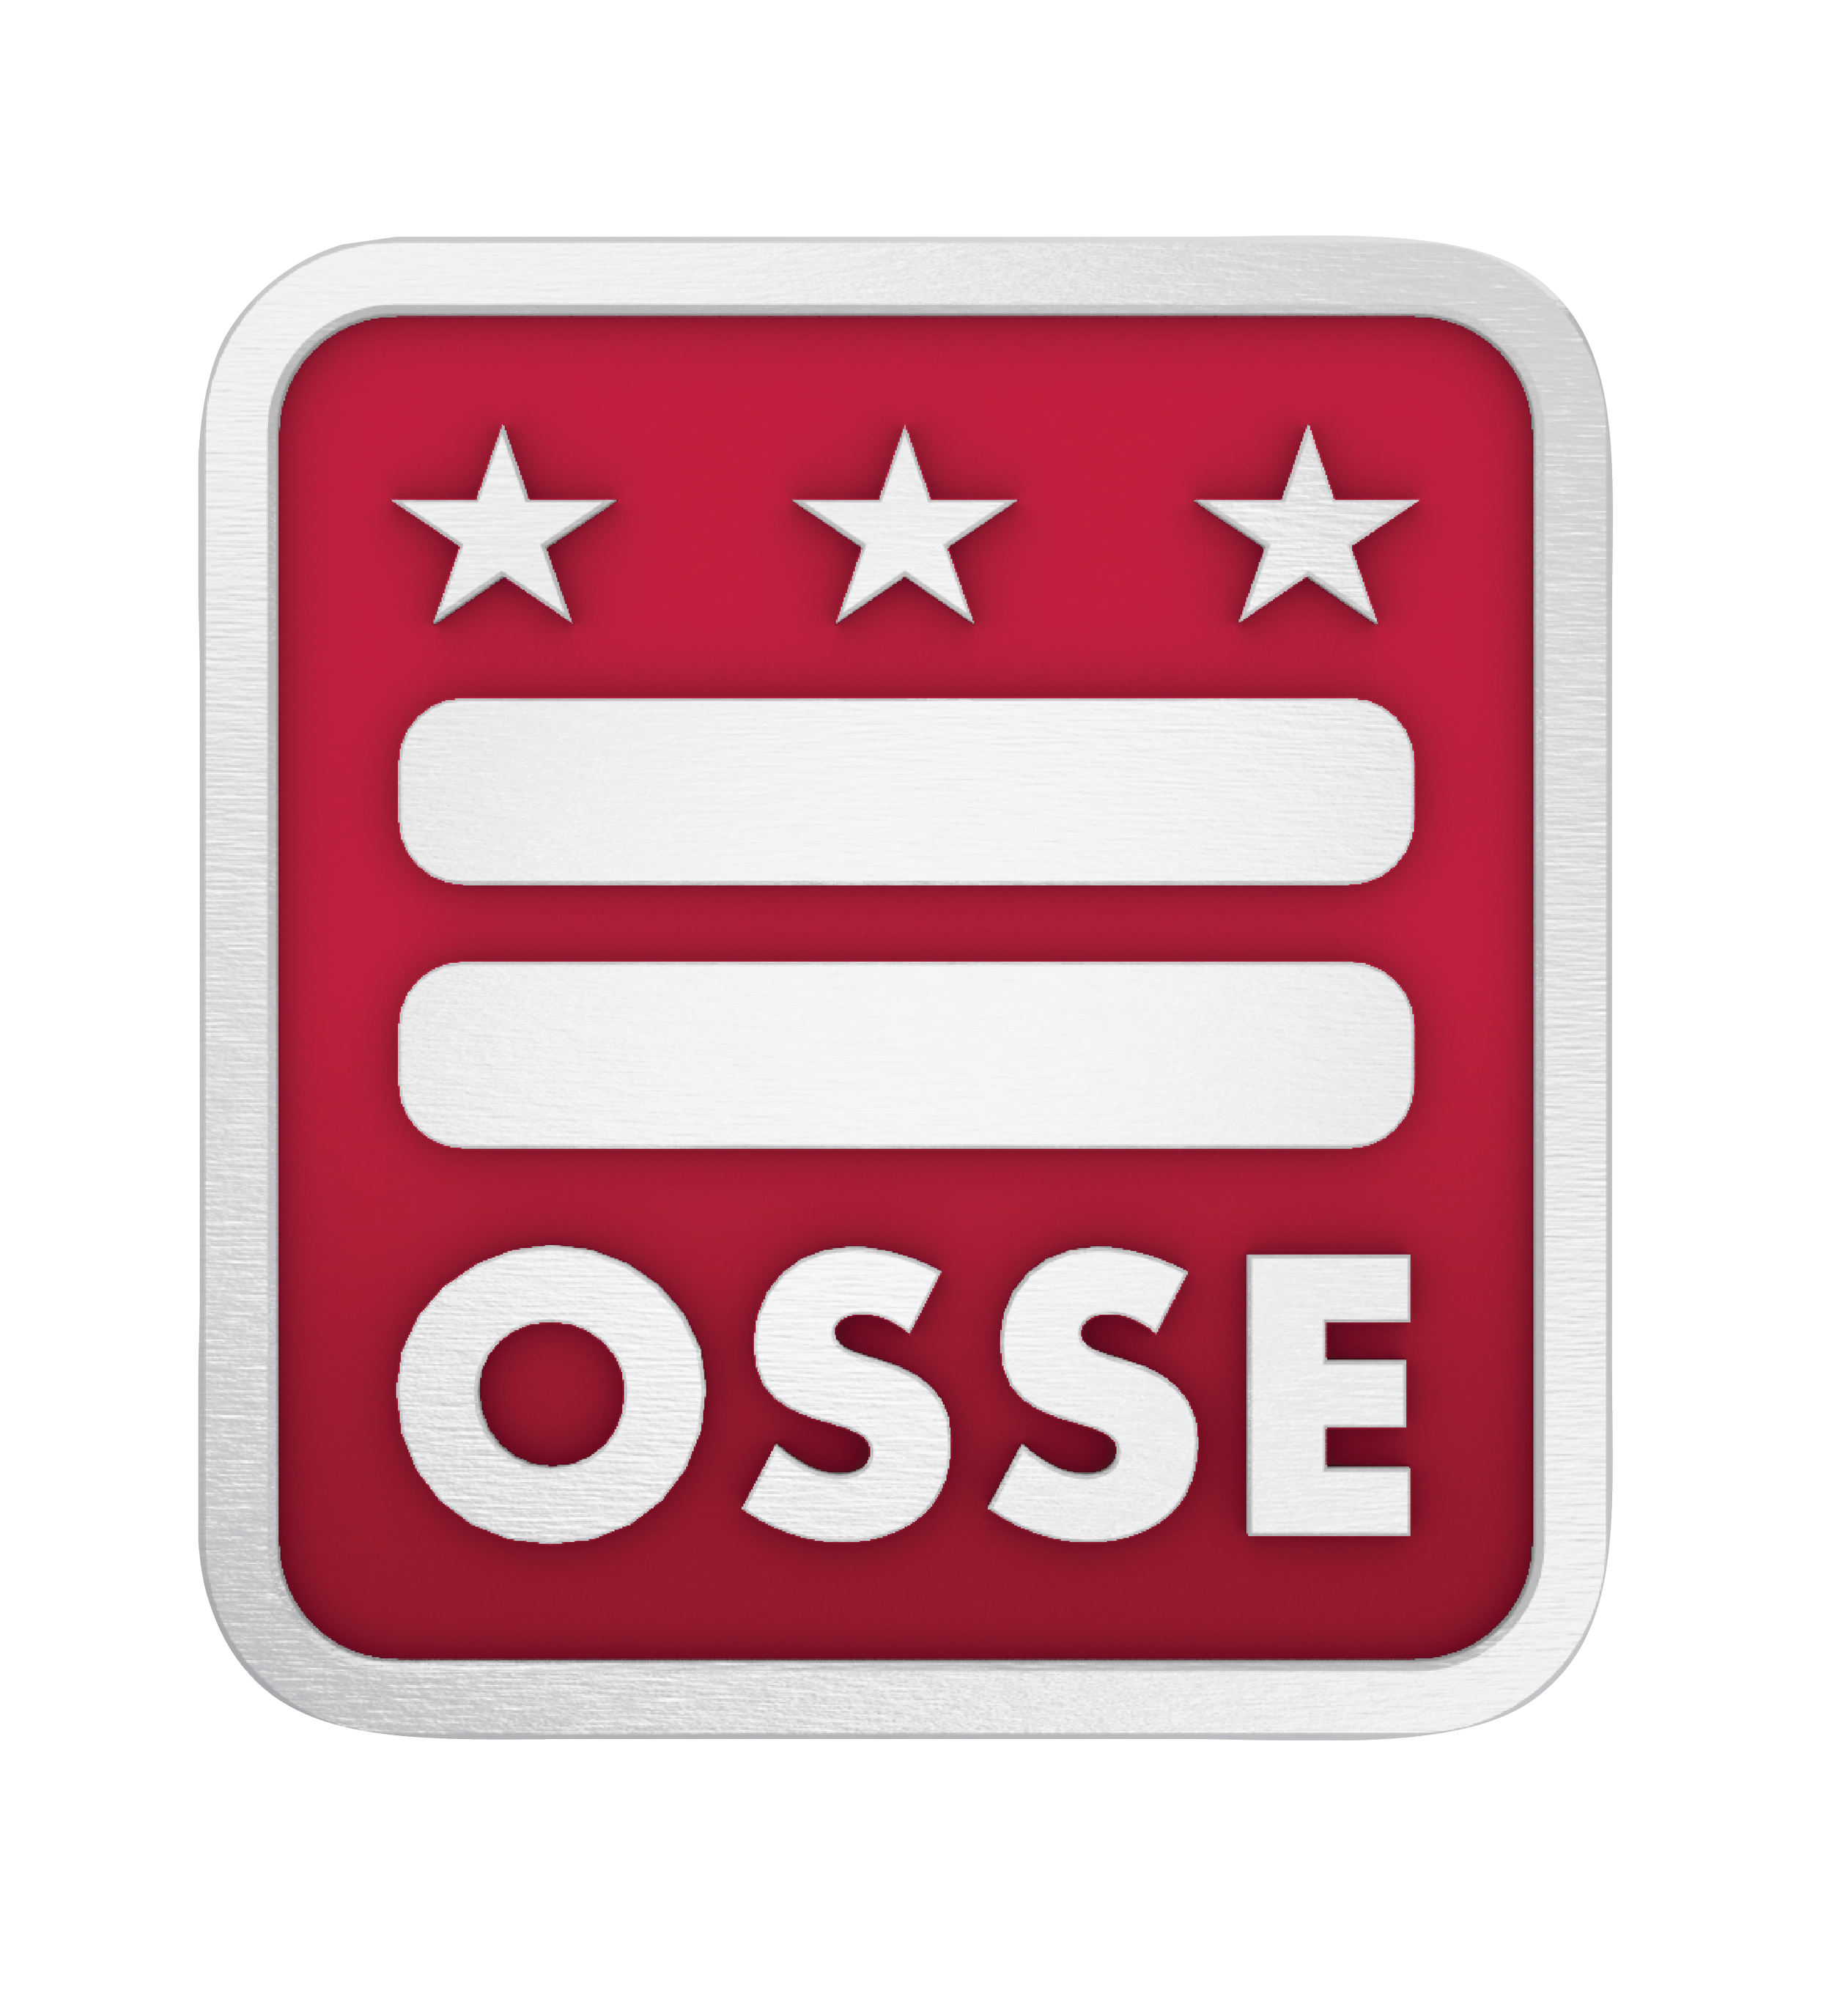 OSSE Logo Dimensional w Clipping Path CMYK.png